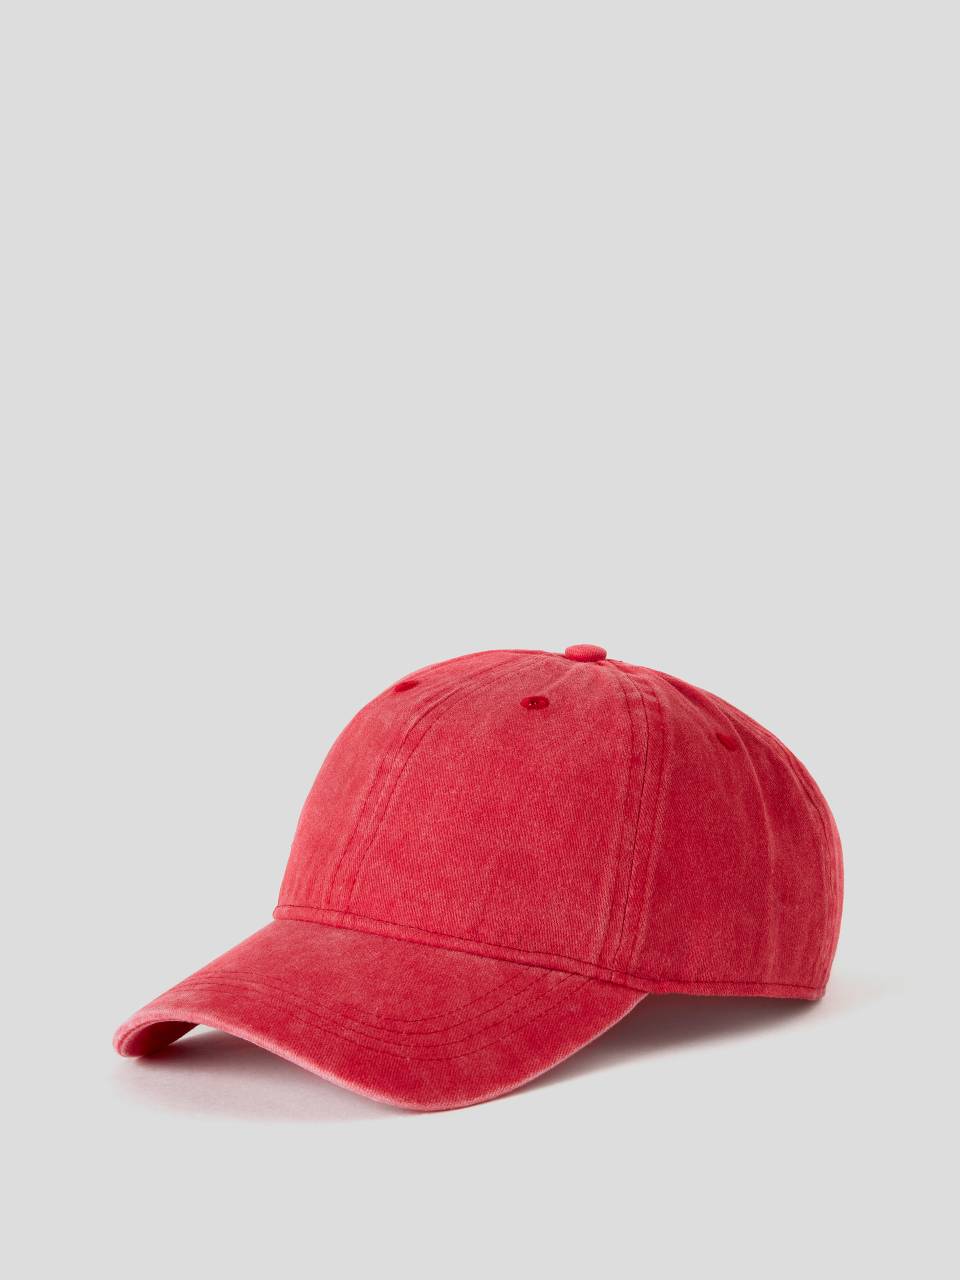 Benetton Red cap with embroidered logo. 1